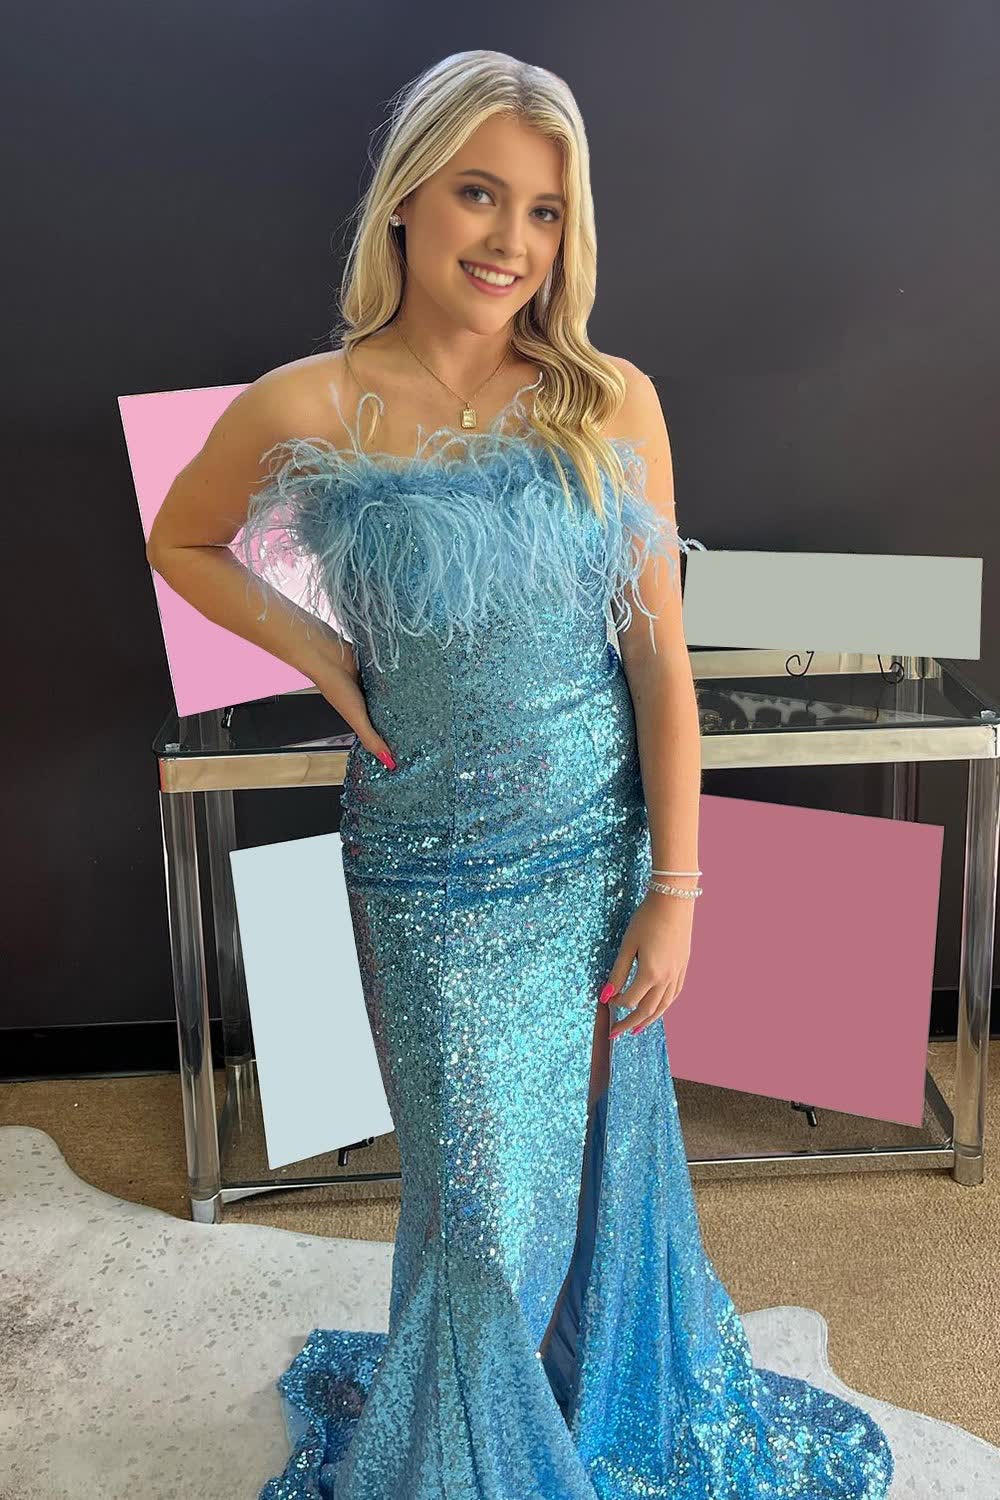 Light Blue Sparkly Sequins Off the Shoulder Long Corset Prom Dress with Feathers outfit, Light Blue Sparkly Sequins Off the Shoulder Long Prom Dress with Feathers